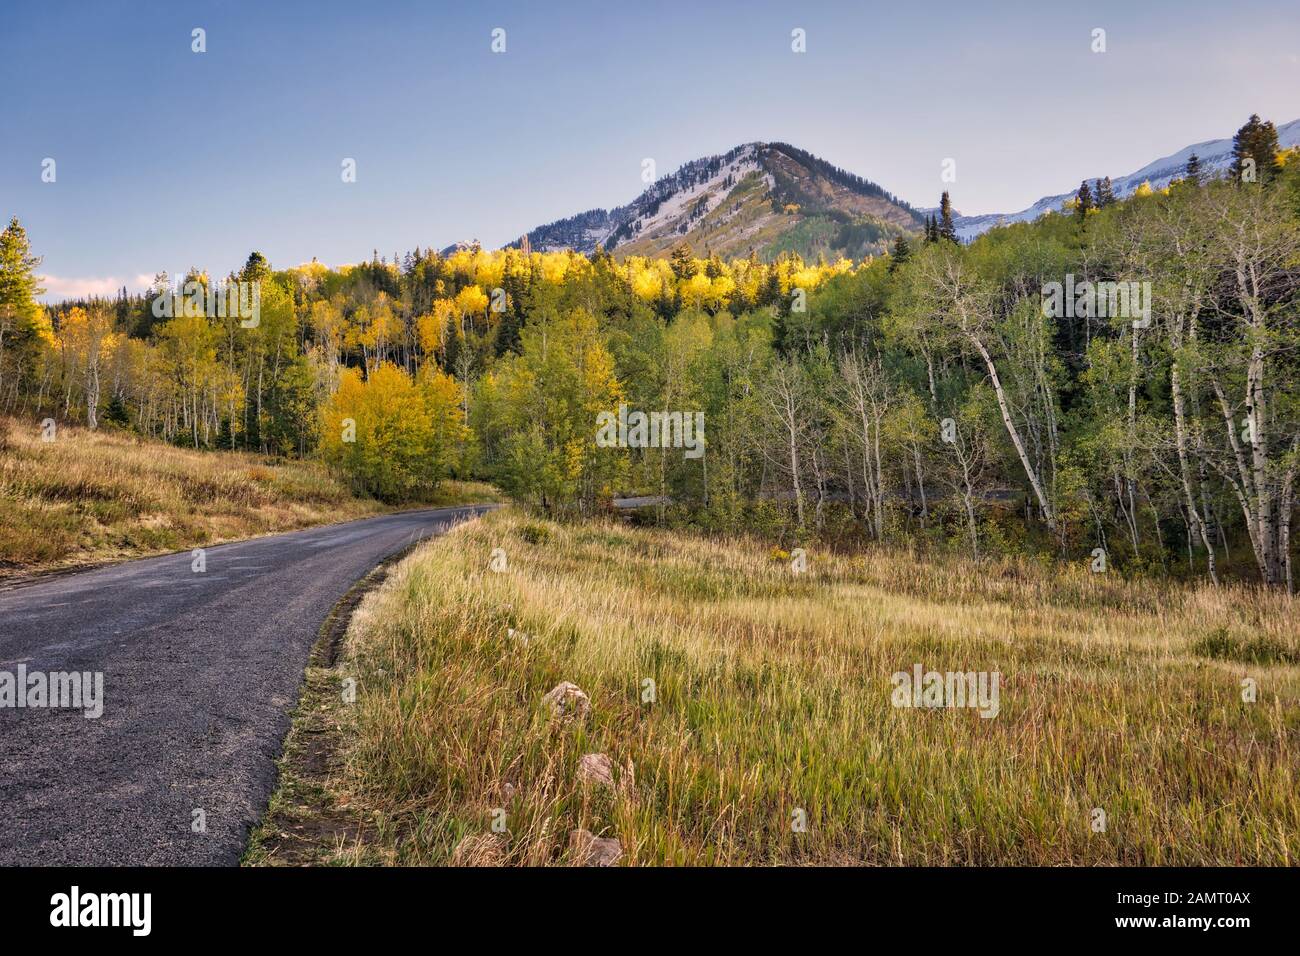 Quaking aspen trees turn golden yellow as the autumn sun shines on the top of the Alpine Loop mountain road in the Wasatch Mountains. Stock Photo